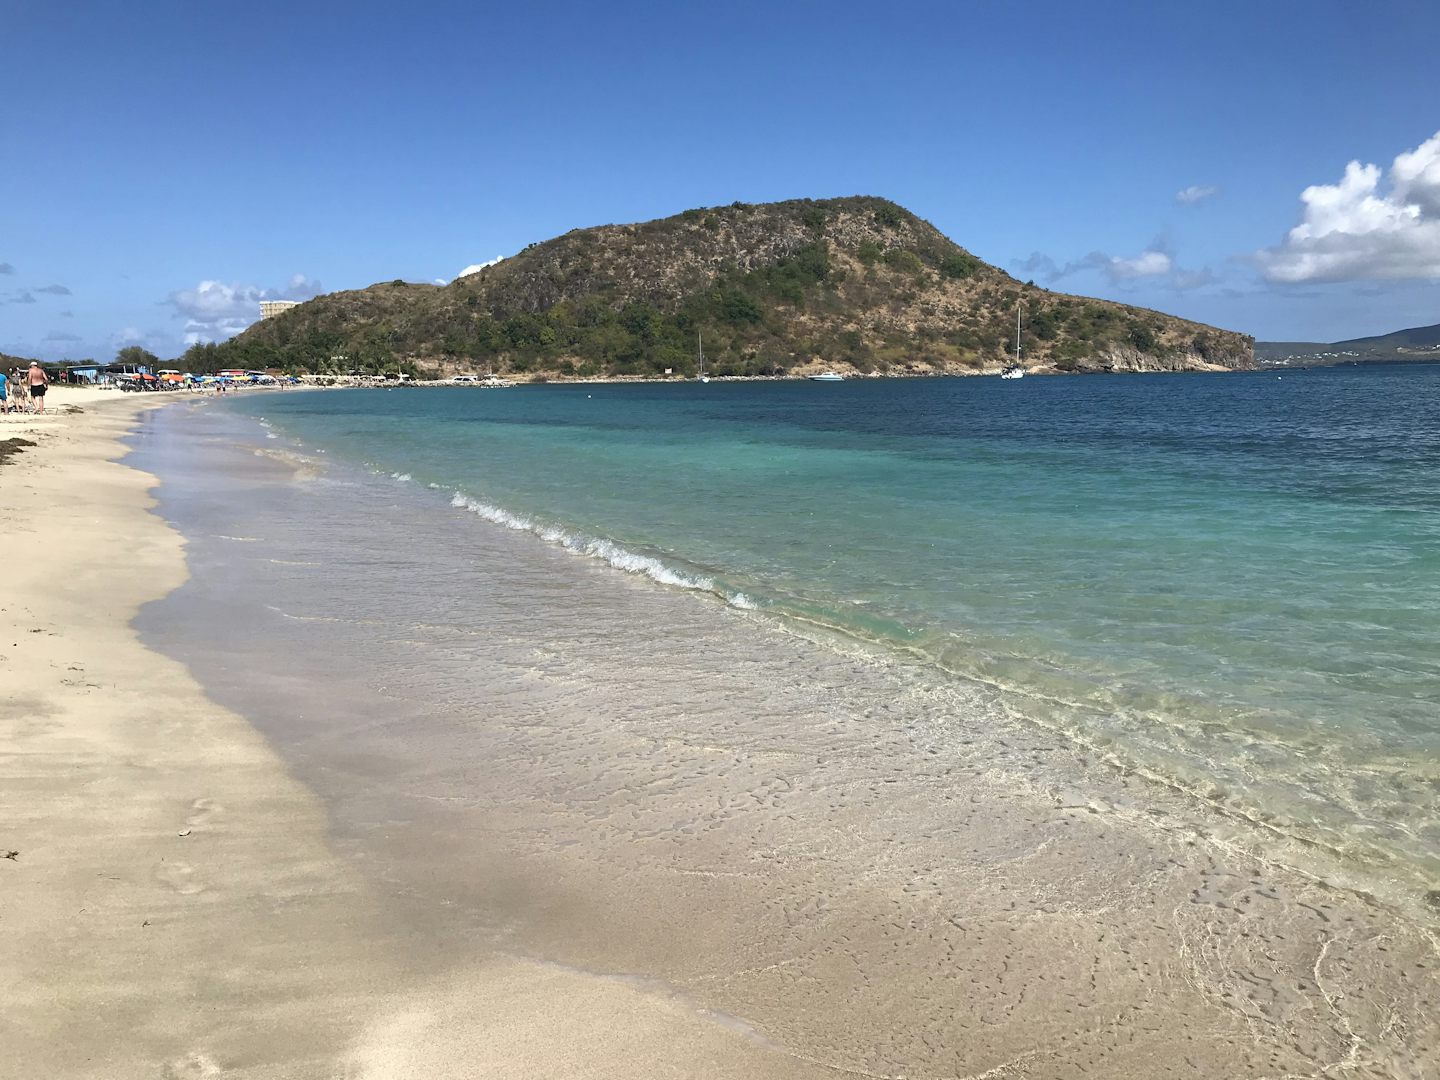 Cockleshell Beach on the southern tip of St. Kitts